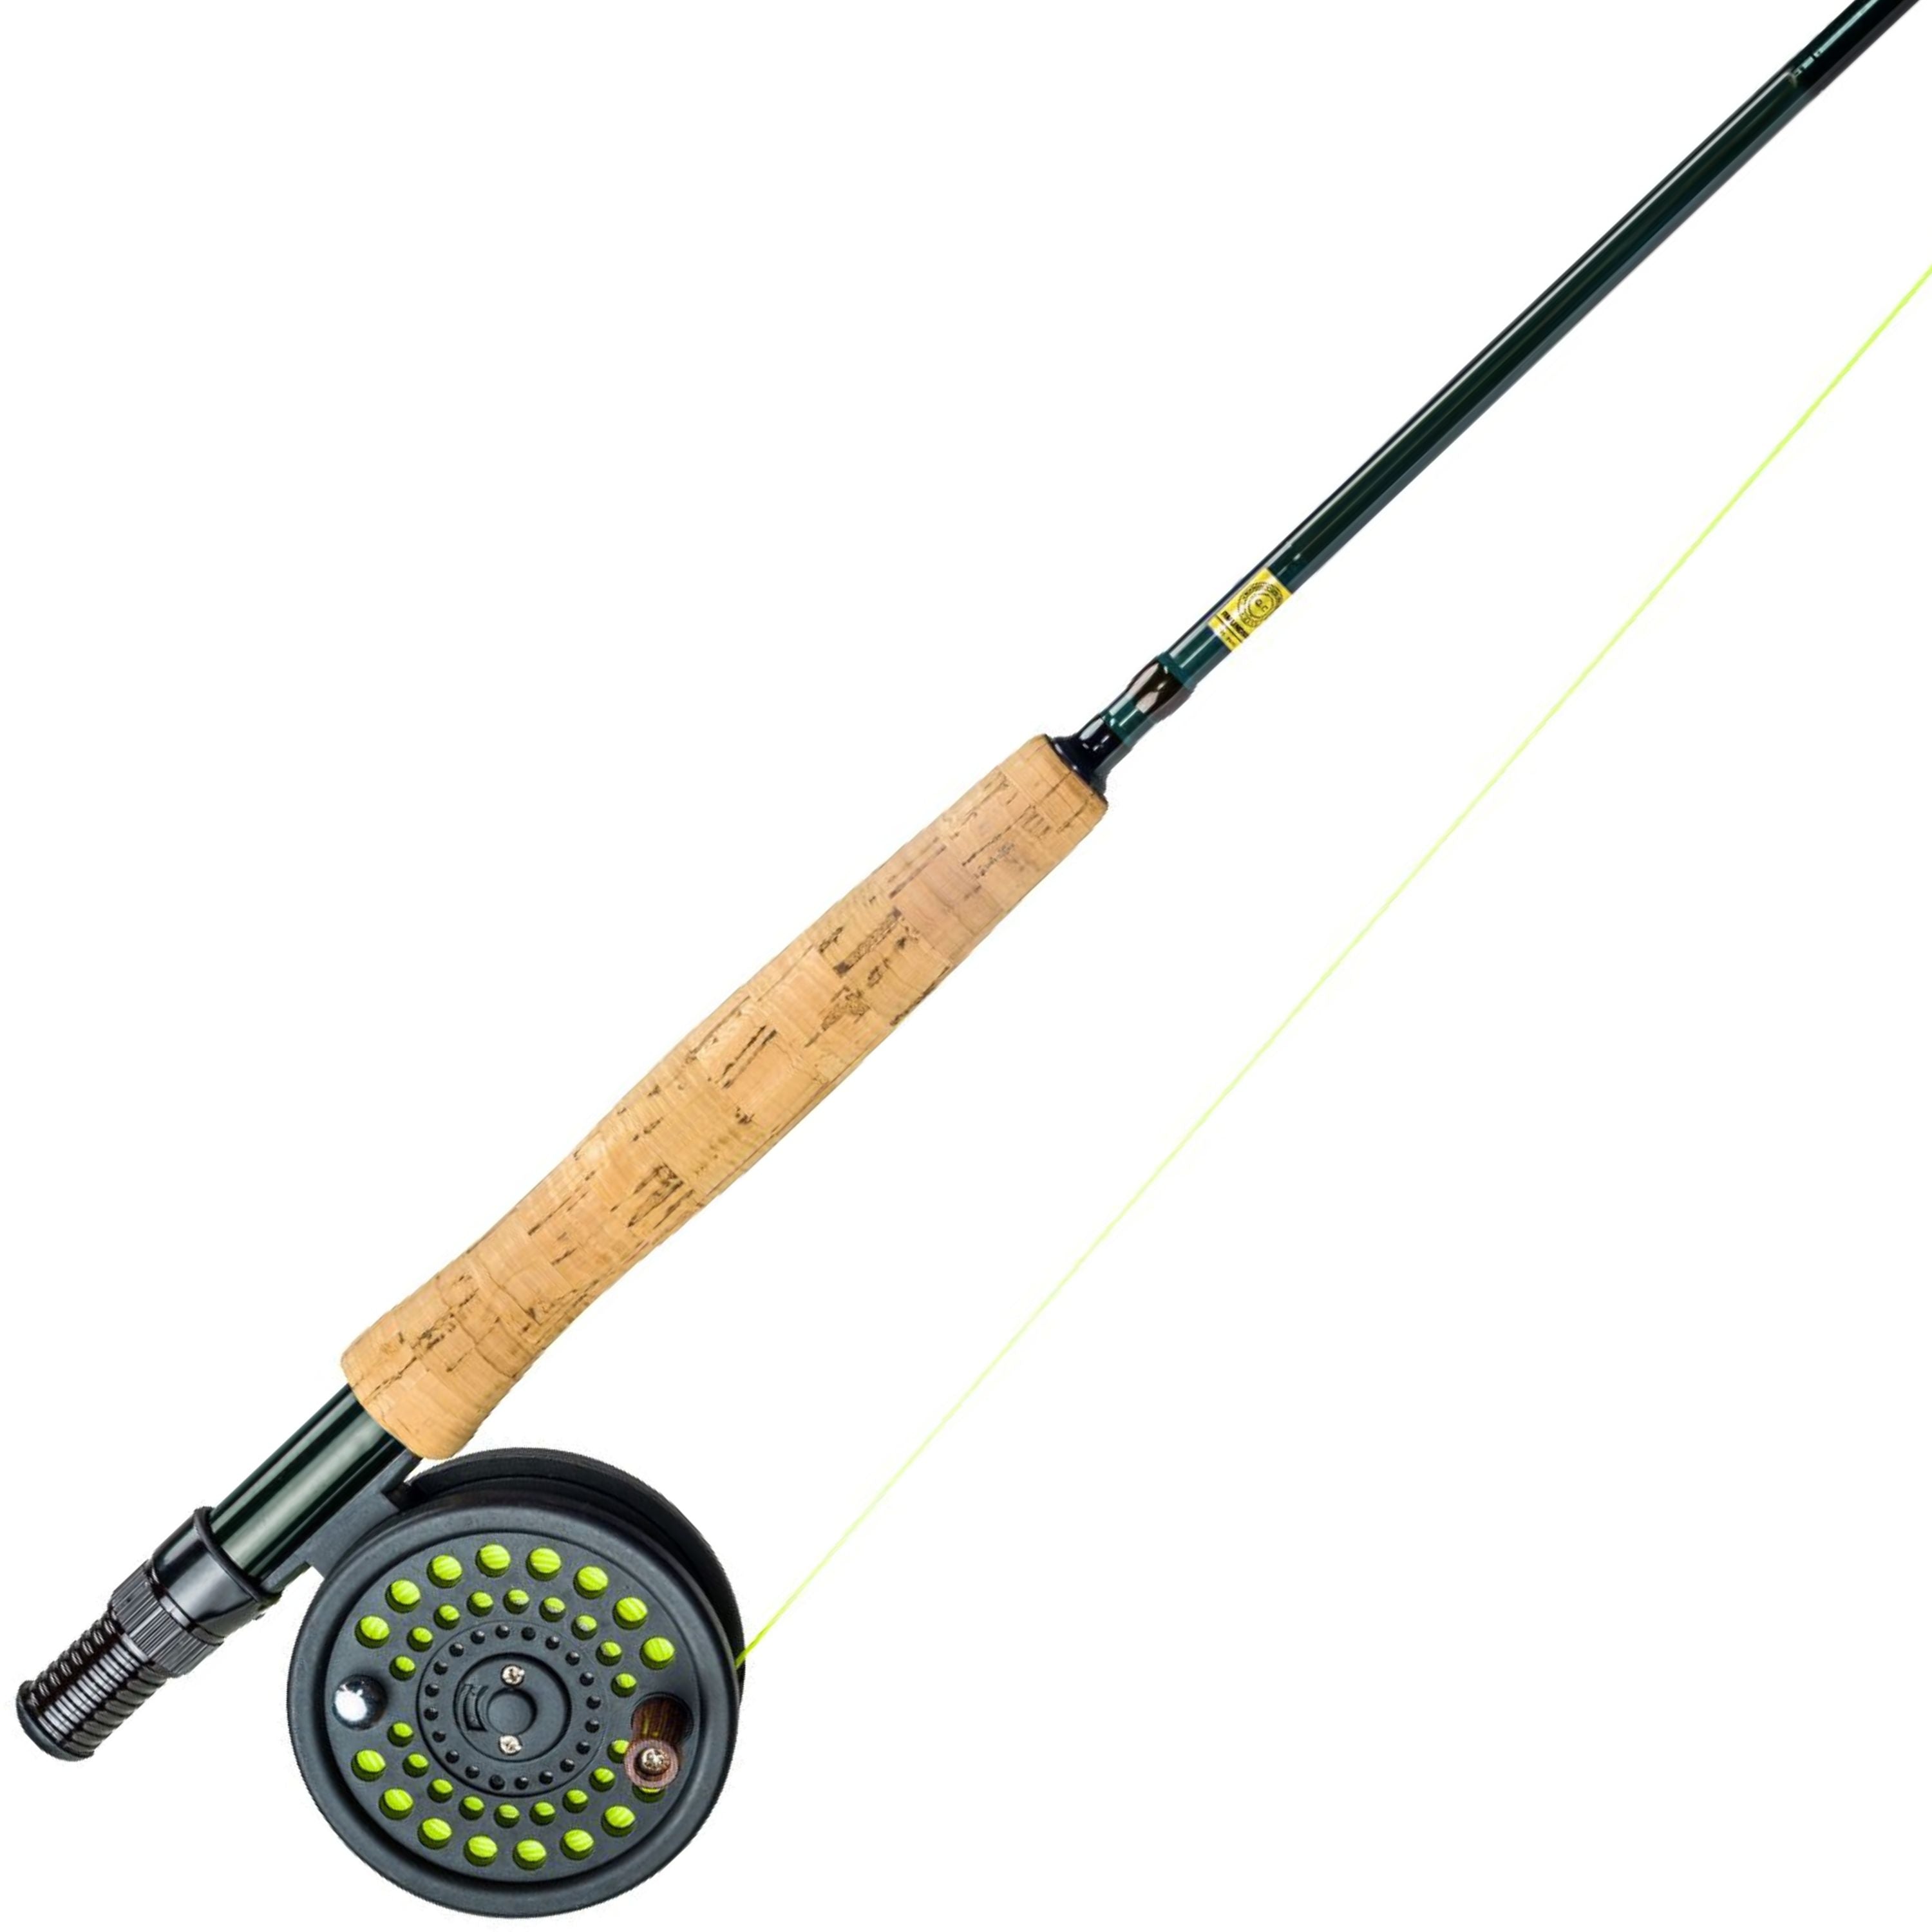 "River Crosser" Fly fishing combo with fishing line